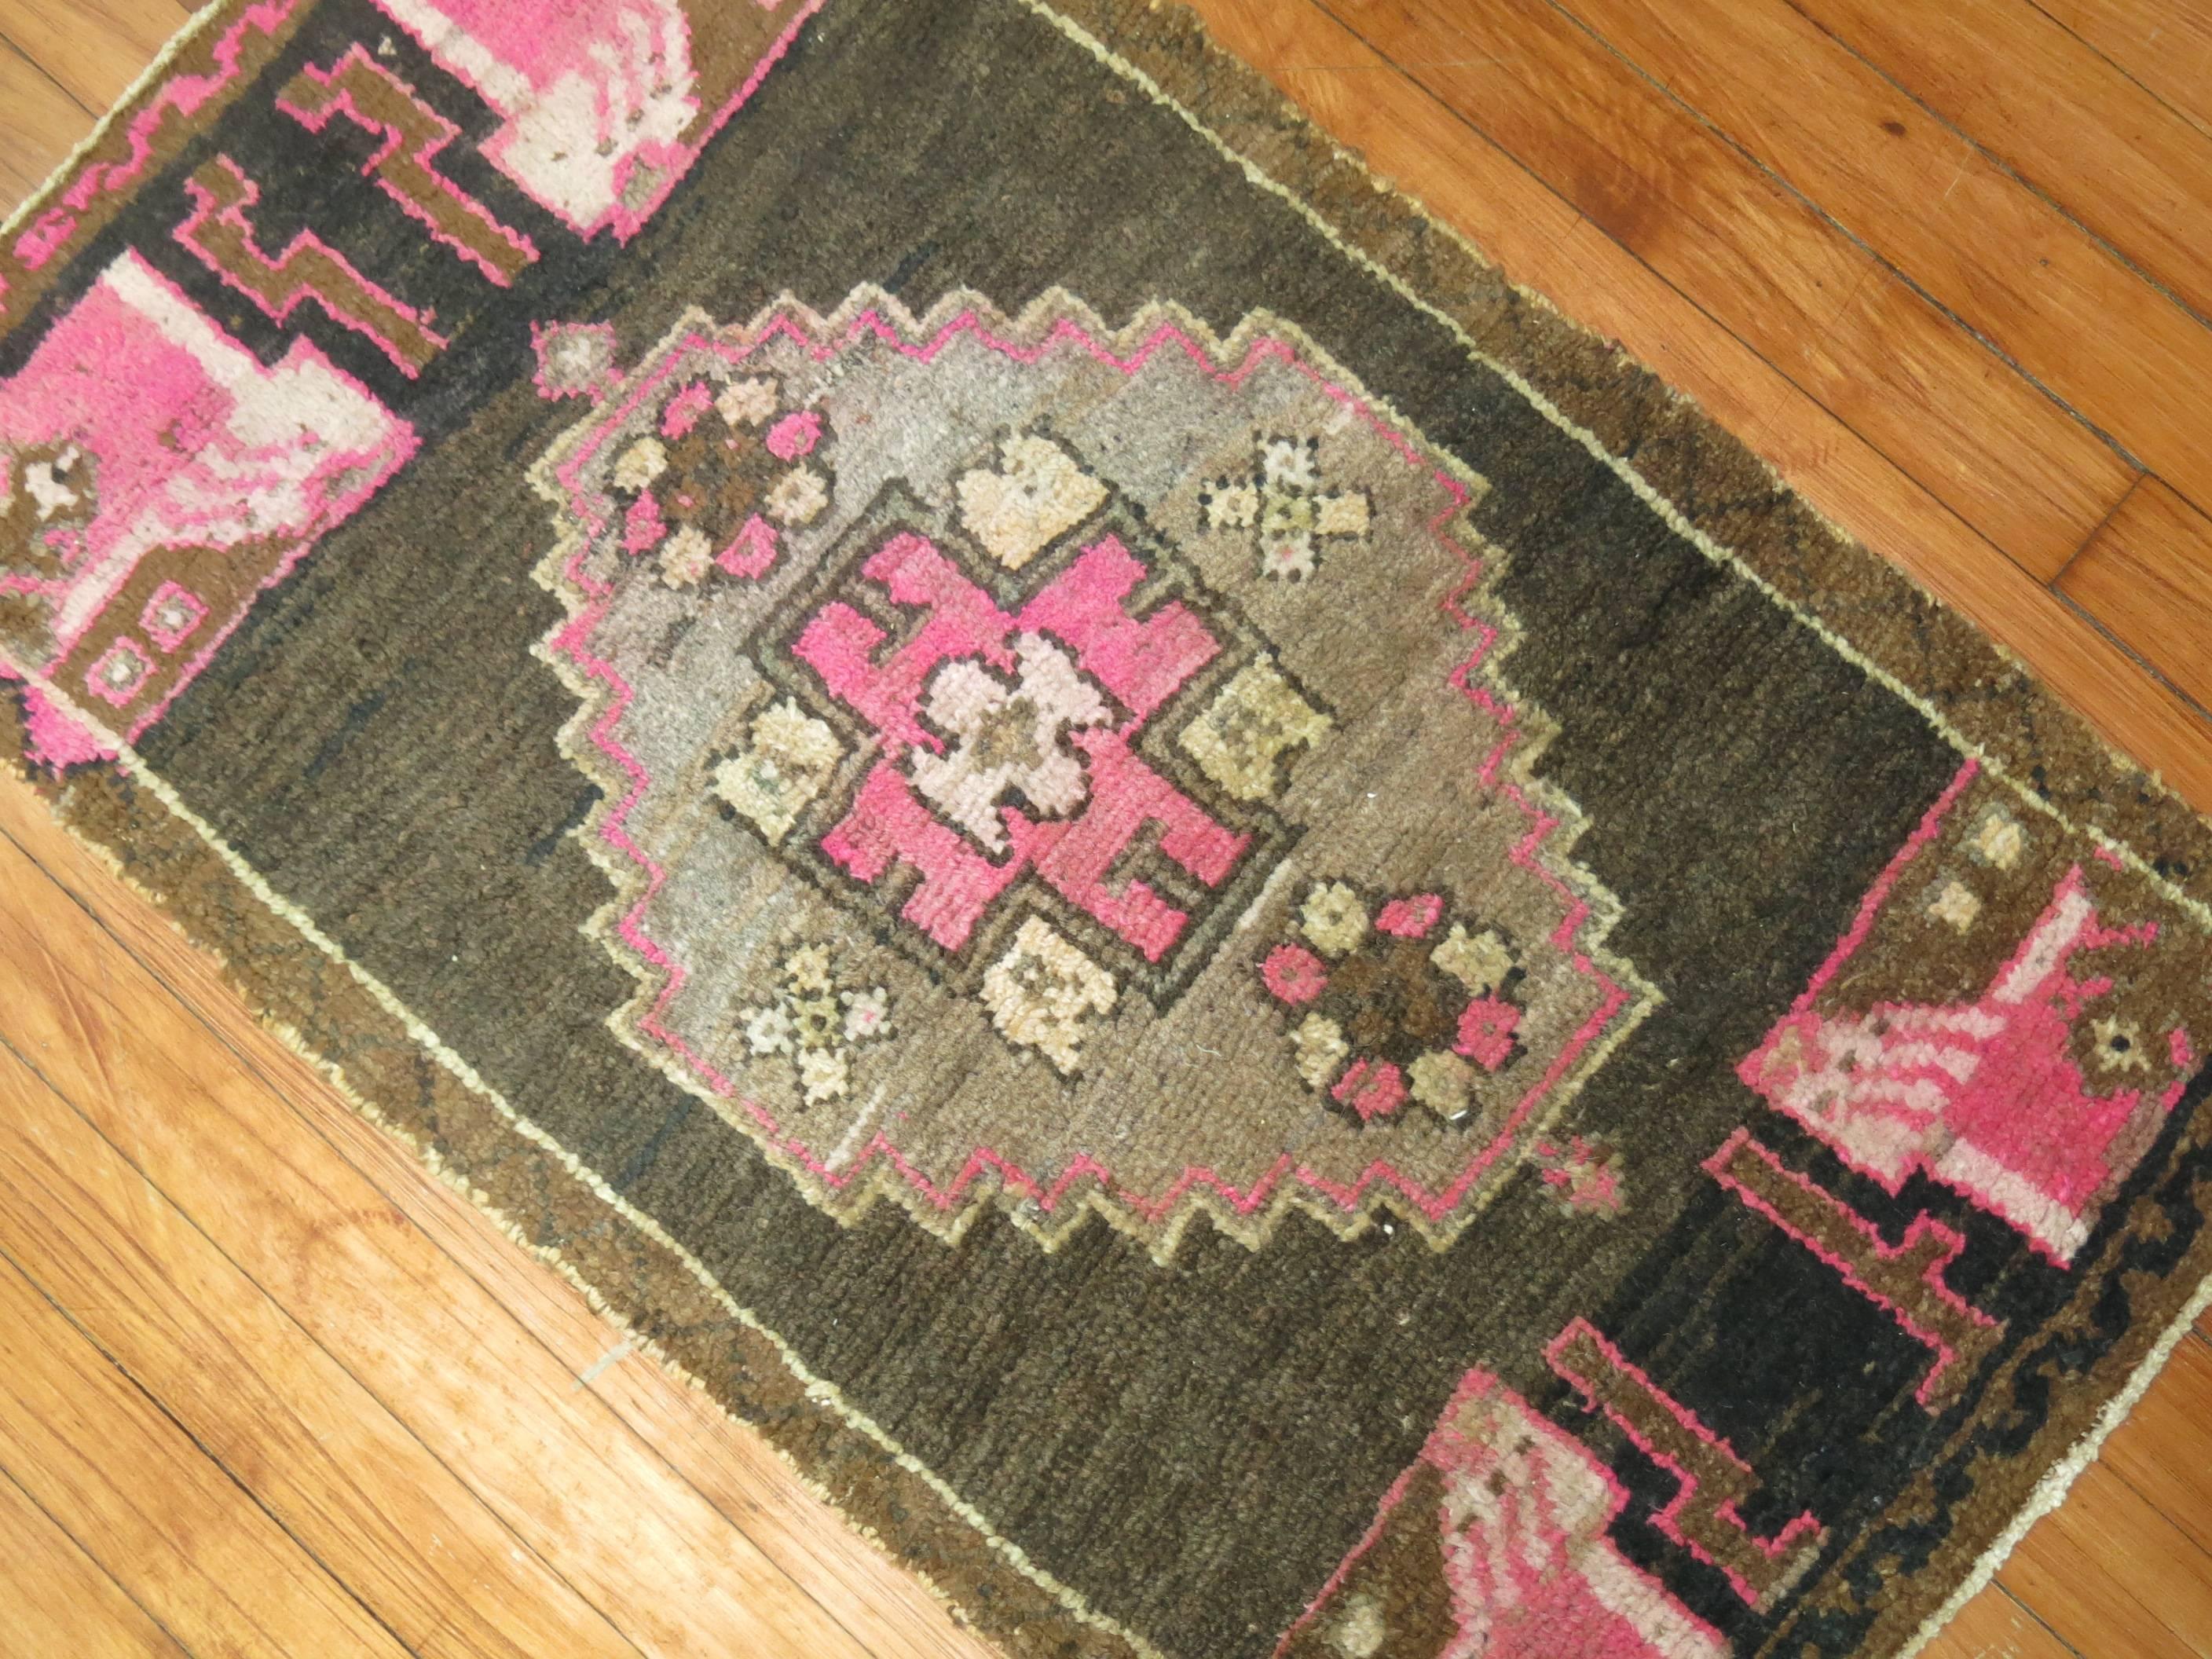 Vintage Turkish Oushak rug in chocolate brown and pink.